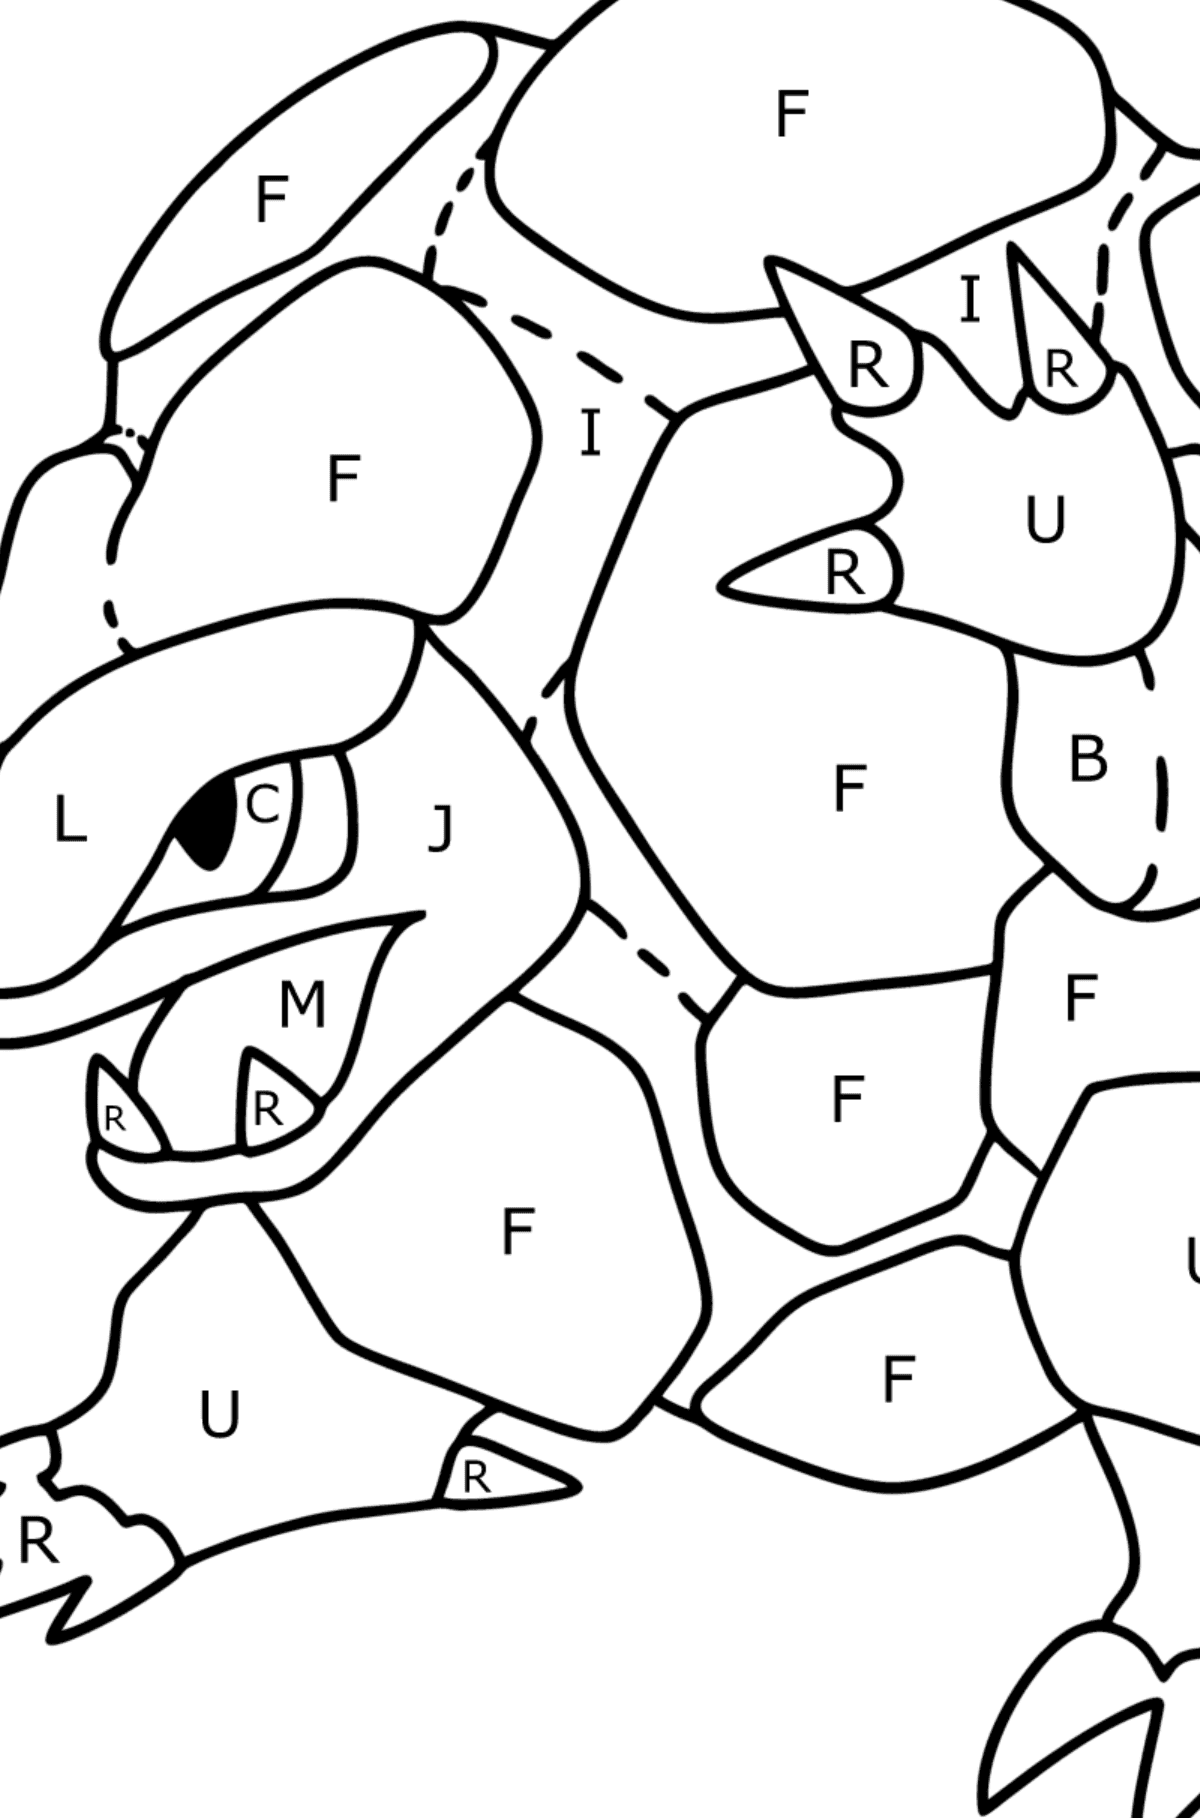 Pokemon Go Golem coloring page - Coloring by Letters for Kids